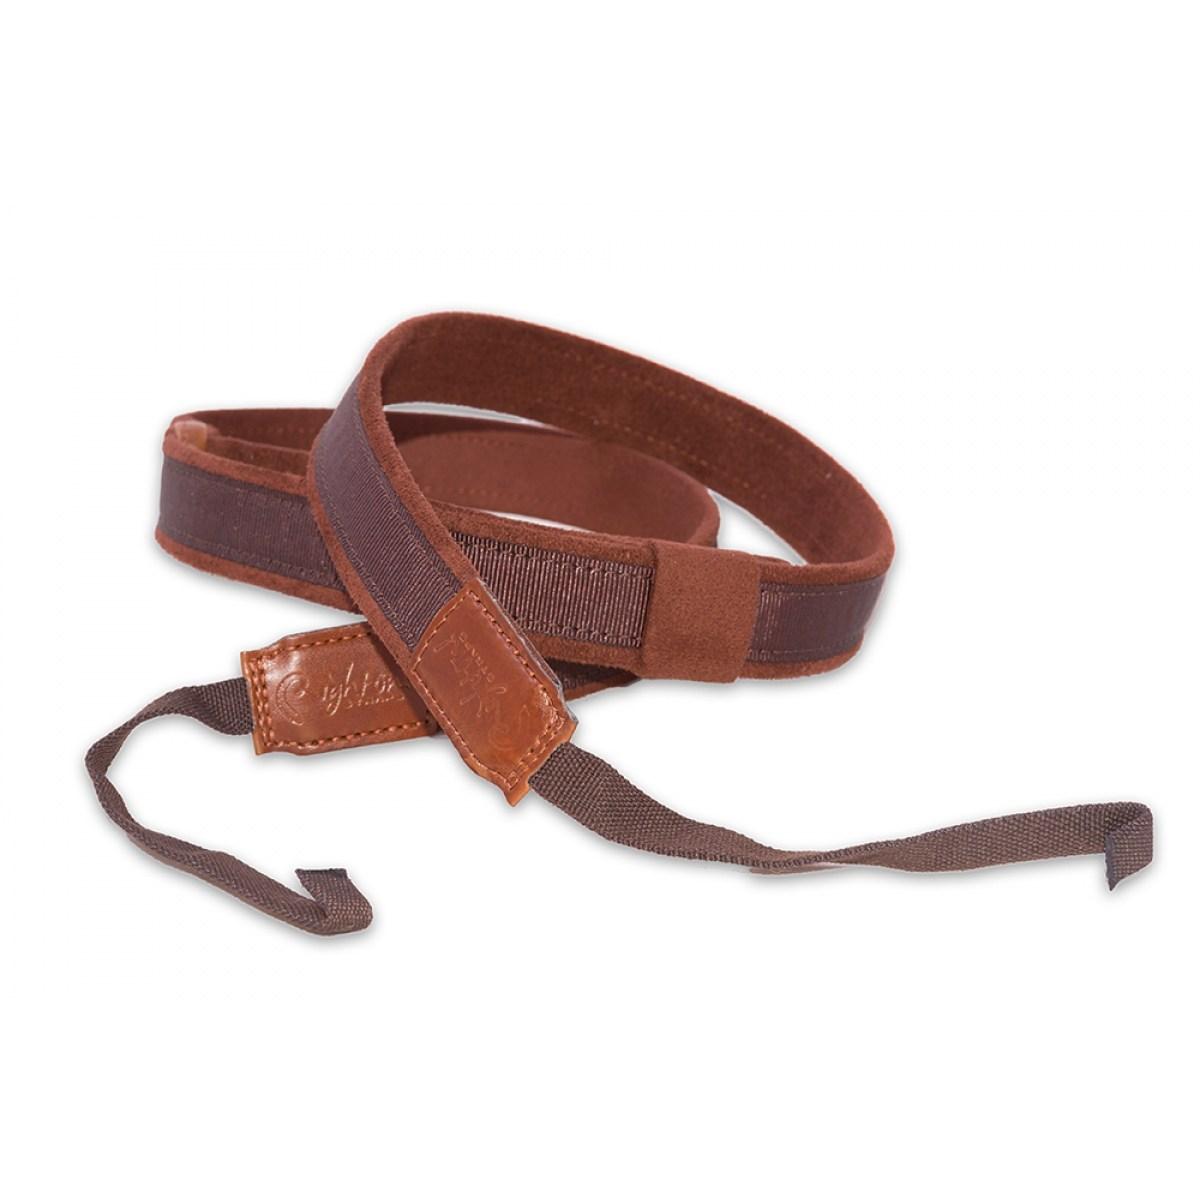 Right on straps ostrich brown